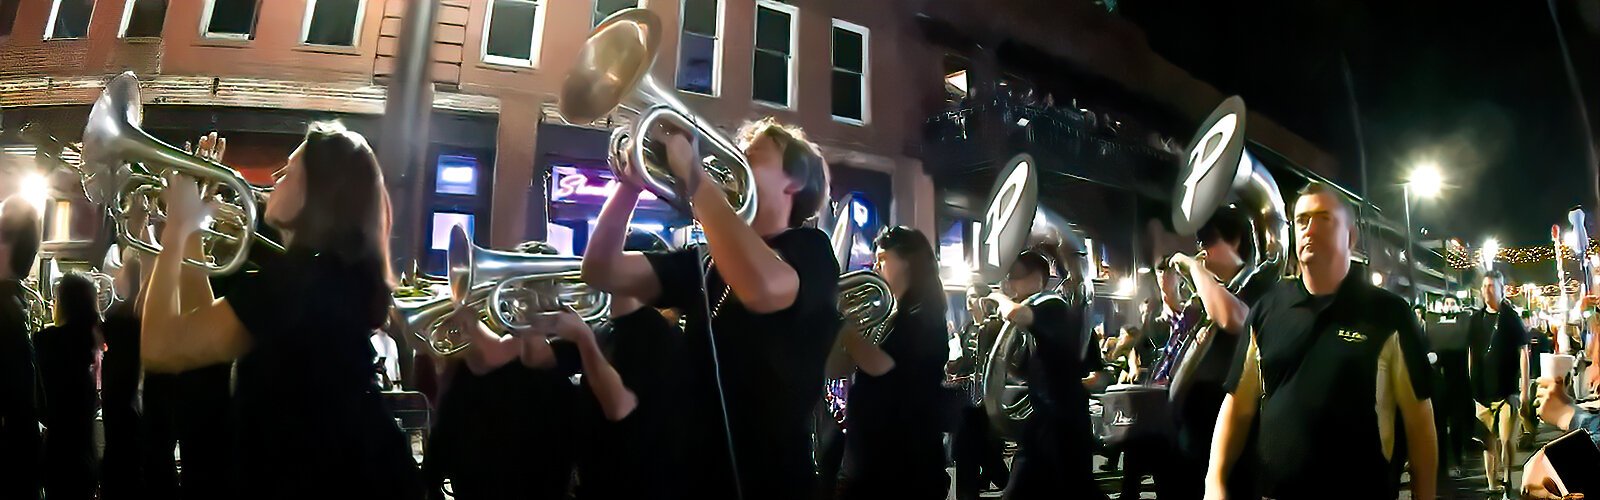 With marching bands, illuminated floats, costumed participants, government officials and dignitaries, the Sant’ Yago Knight parade has been celebrated in historic Ybor City since 1974.